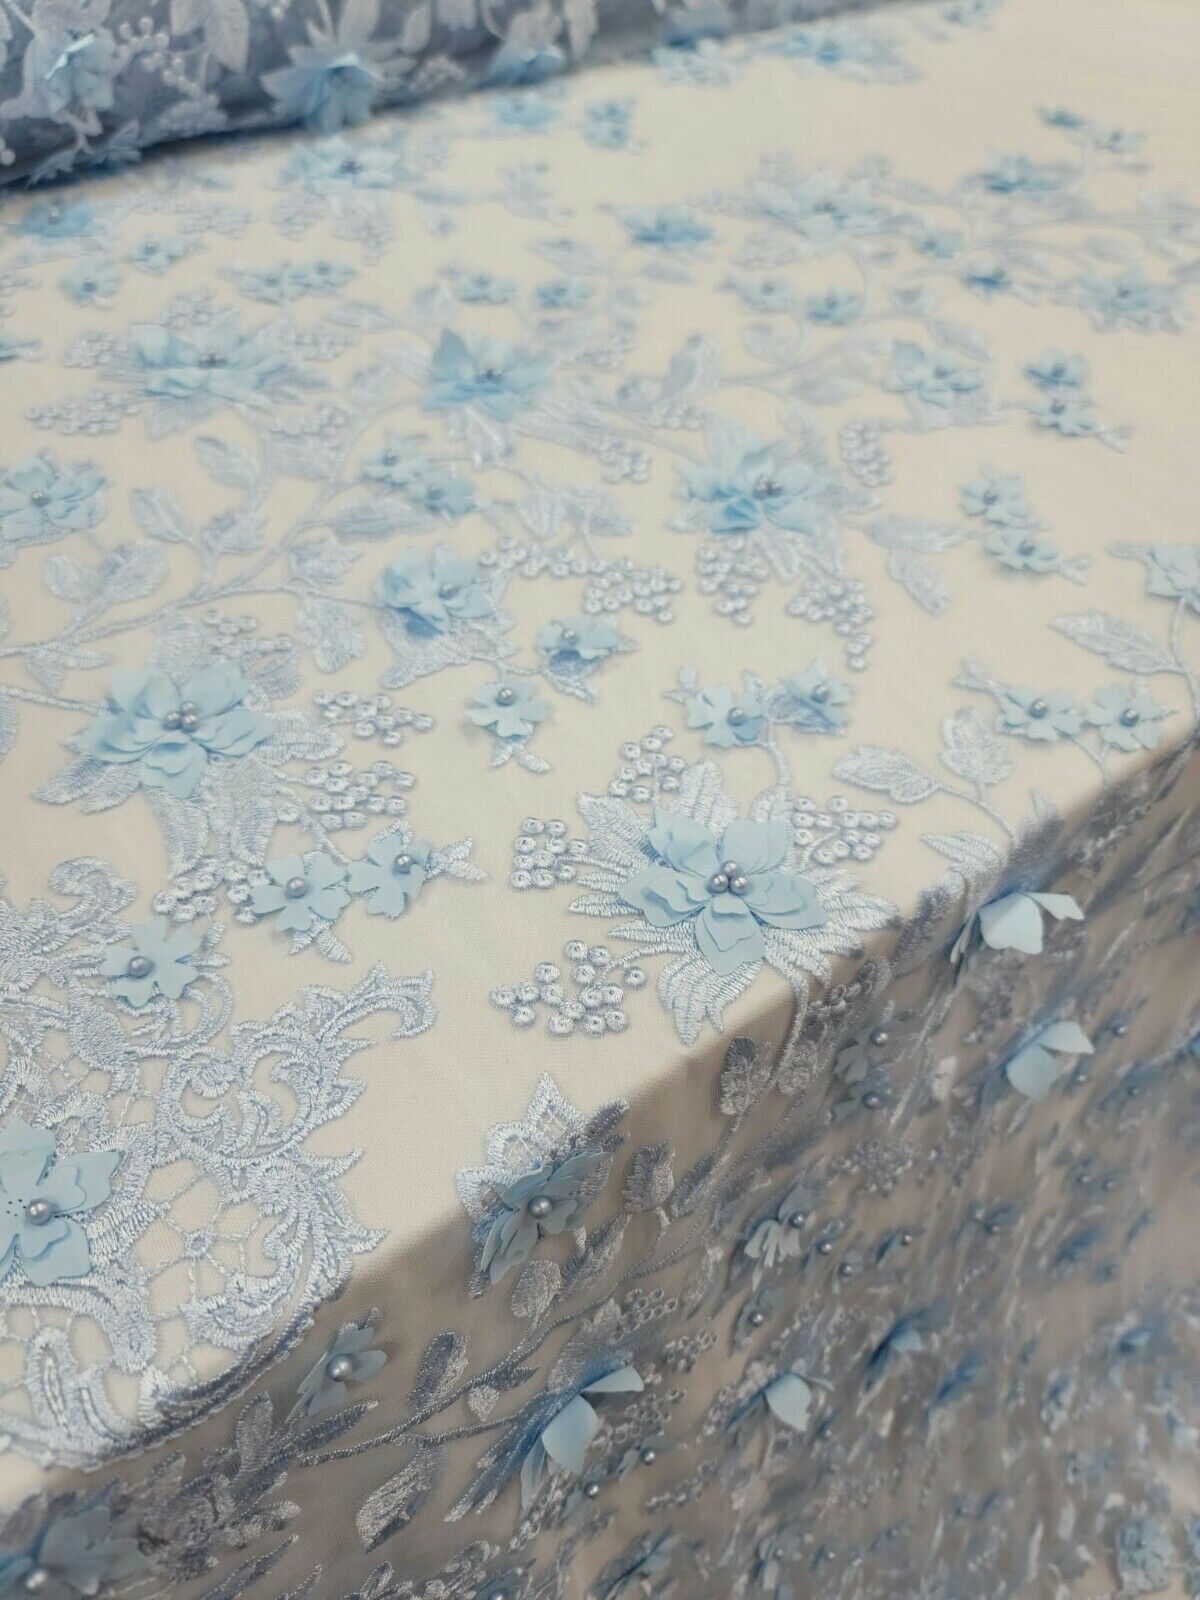 Sky Blue Lace 3D Floral Flowers Prom Fabric - Sold by the Yard for Quinceañera Bridal